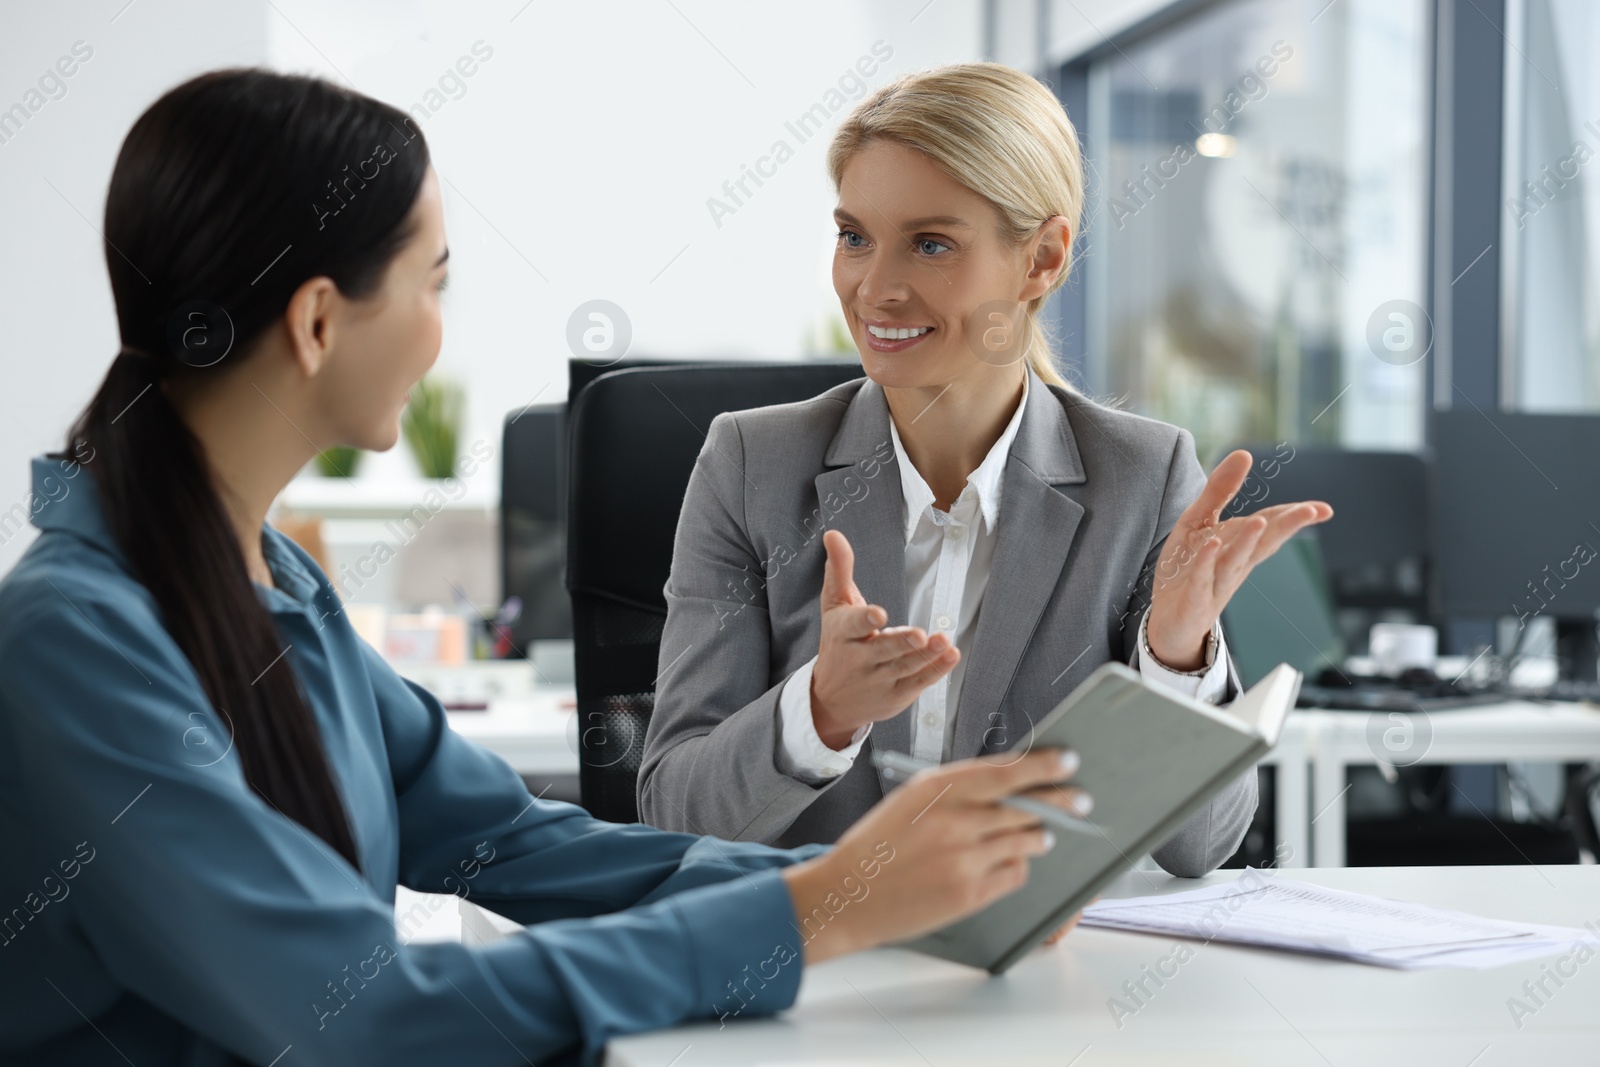 Photo of Lawyers with notebook working together at table in office